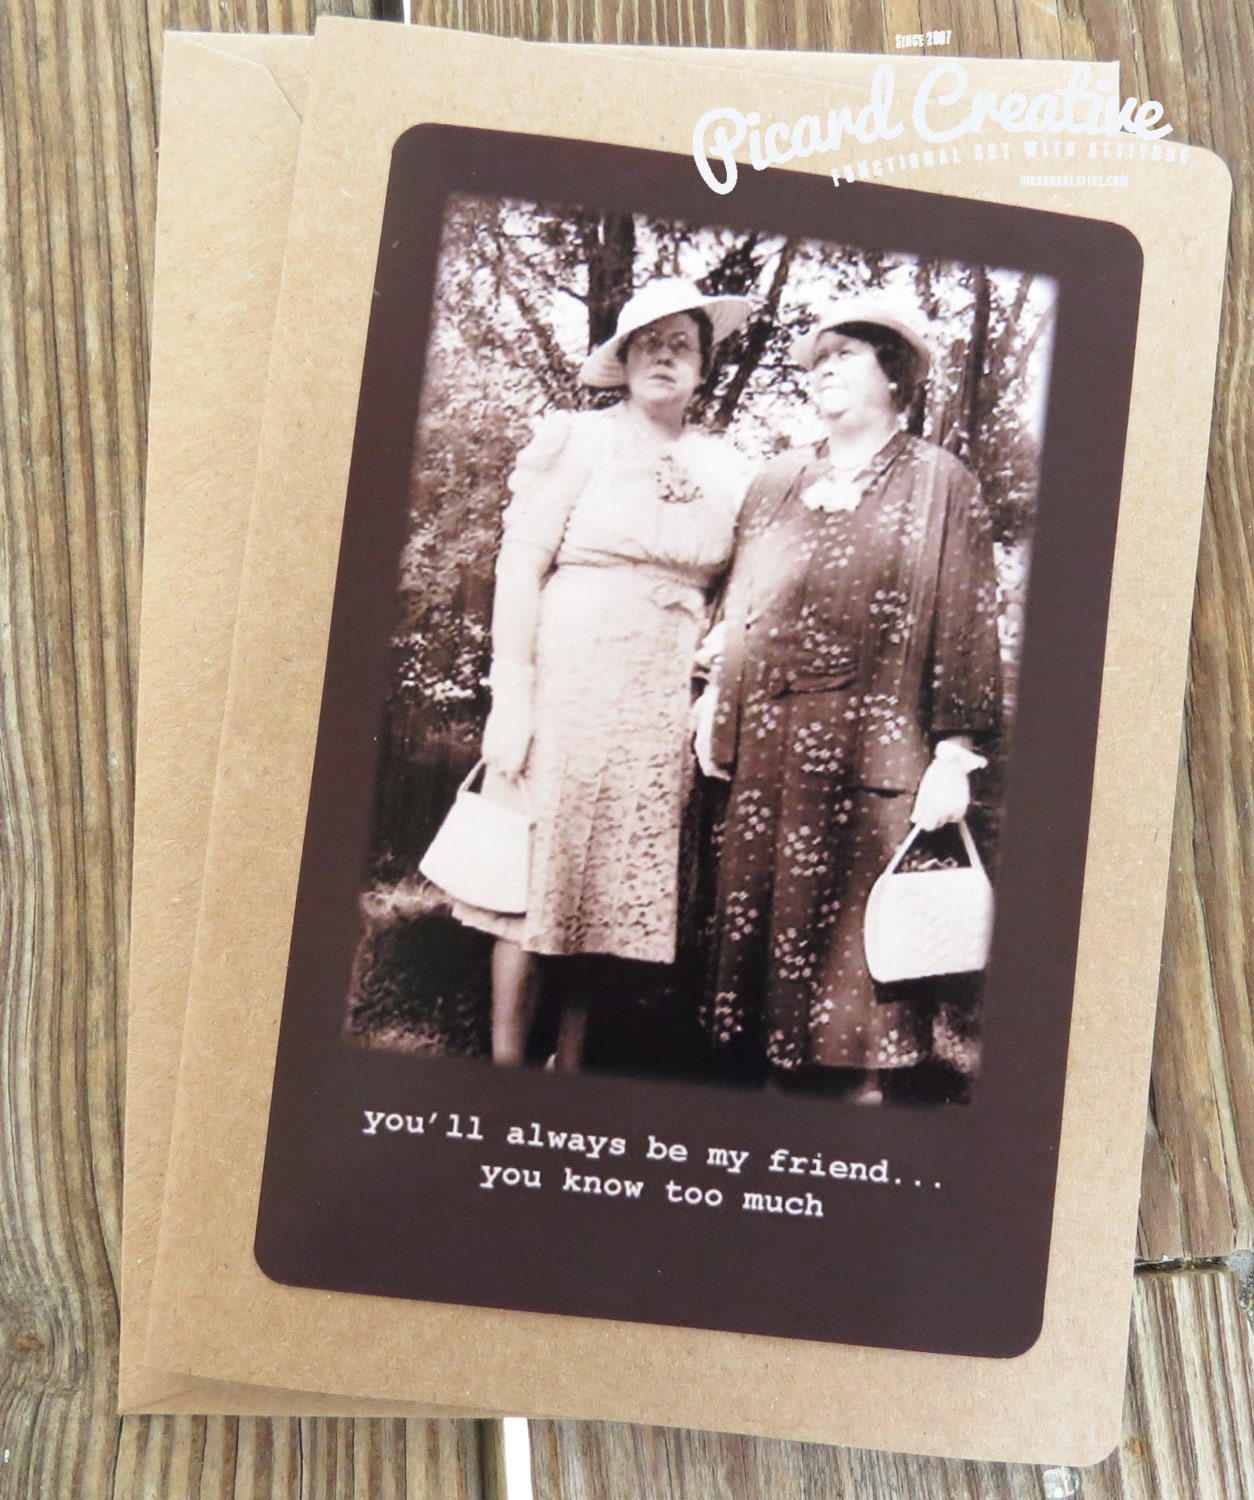 Funny Vintage Friendship Greeting Card. you'll always be